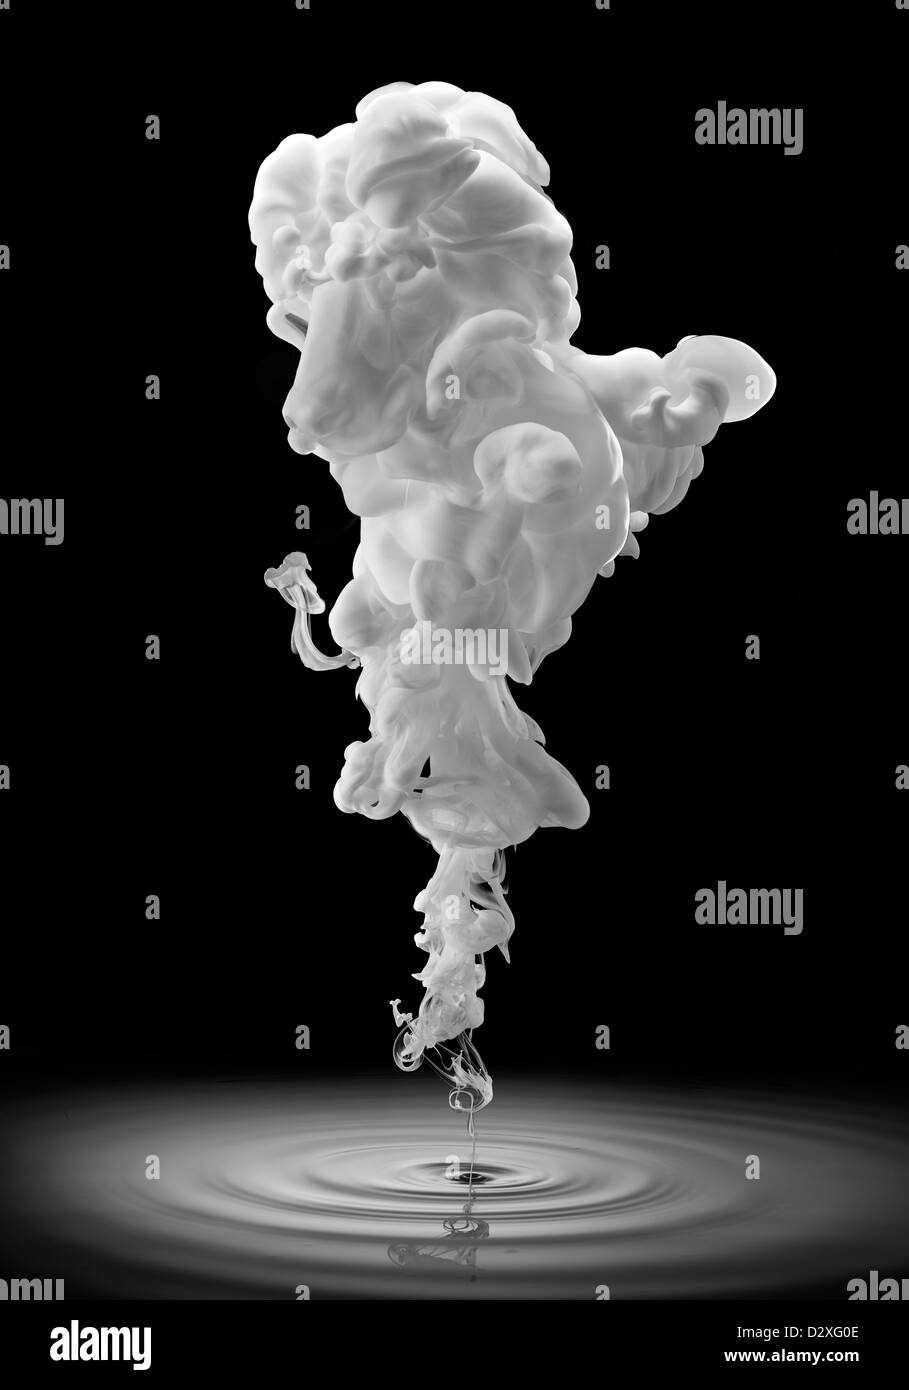 Smoke forming poodle face Stock Photo